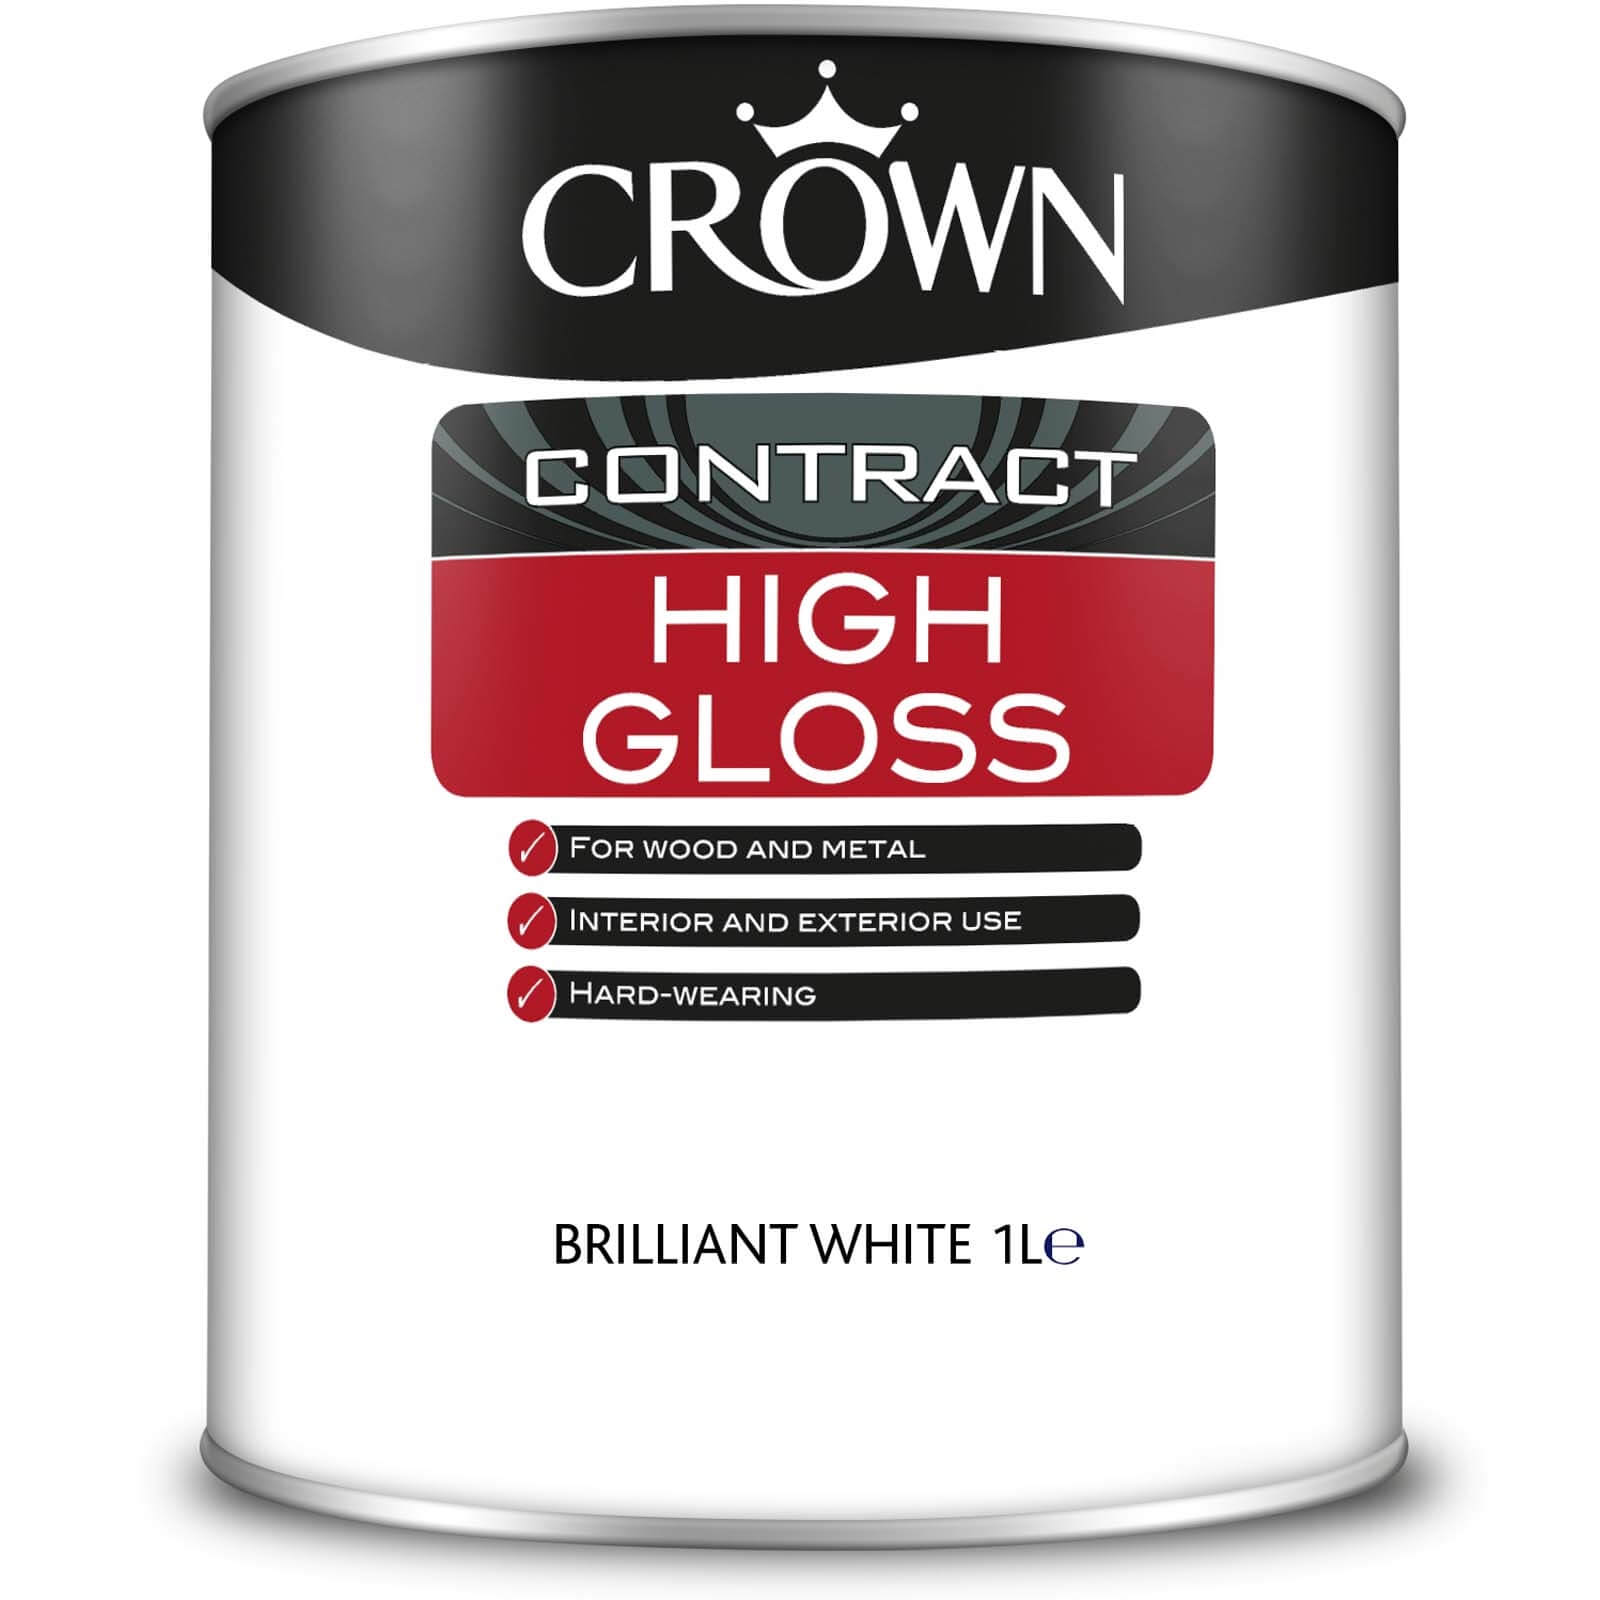 Crown Contract High Gloss Brilliant White Paint - 1L